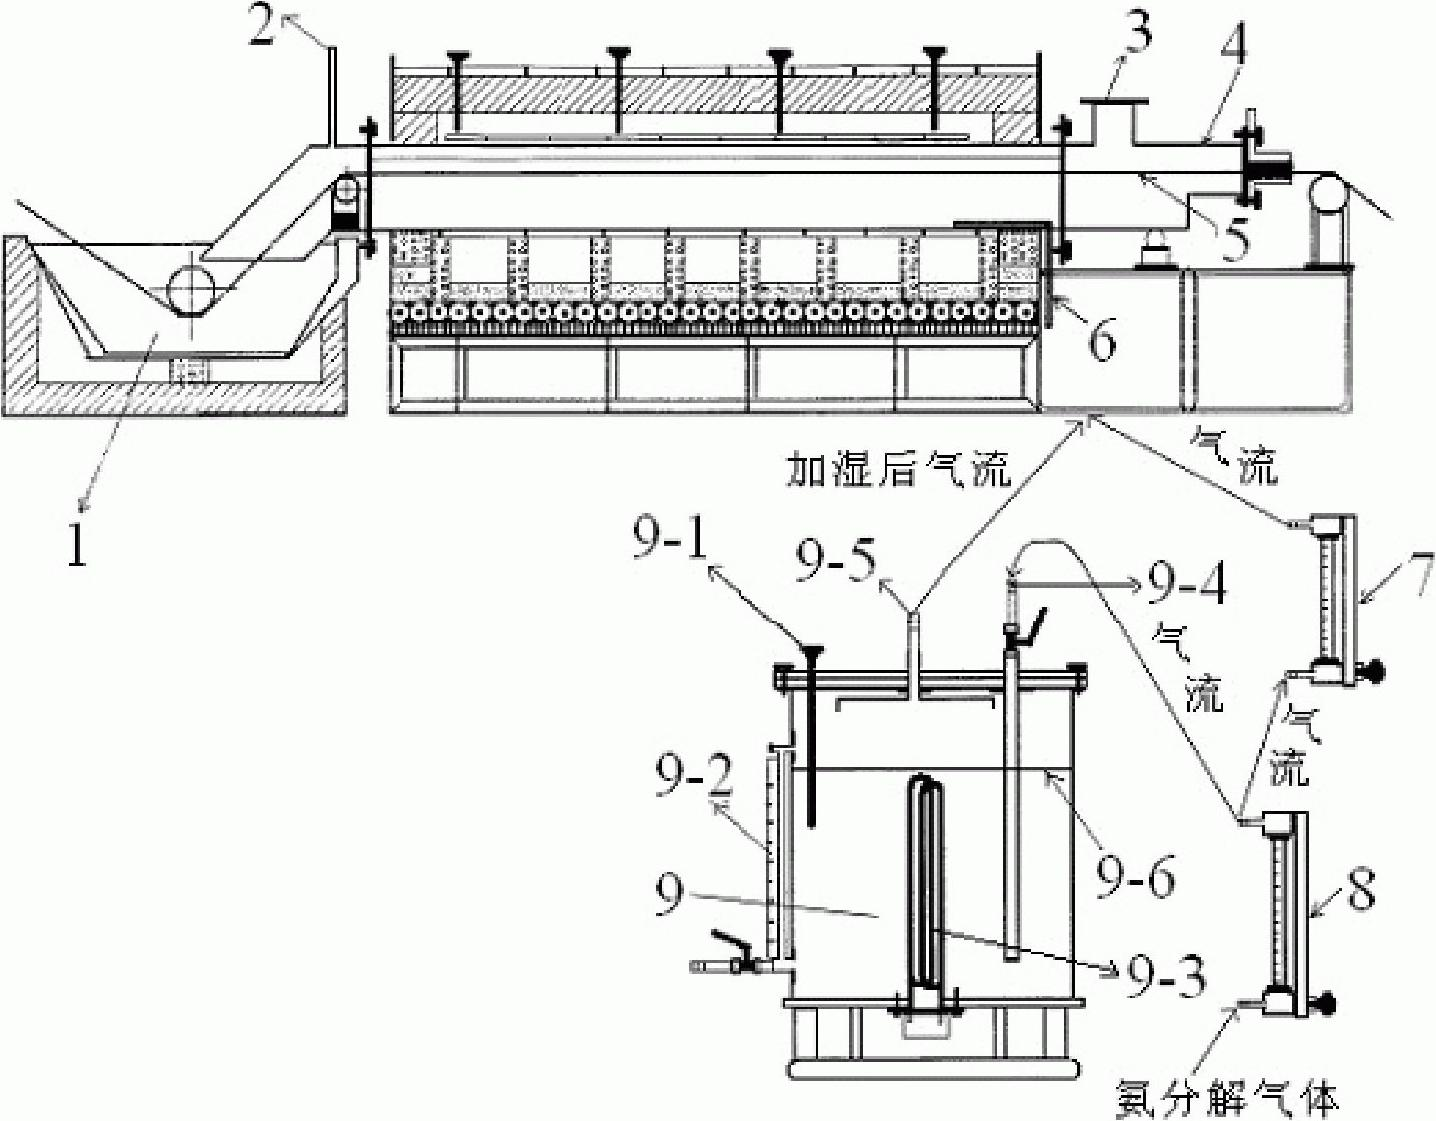 Process for quenching die-cutting rule band steel for printing